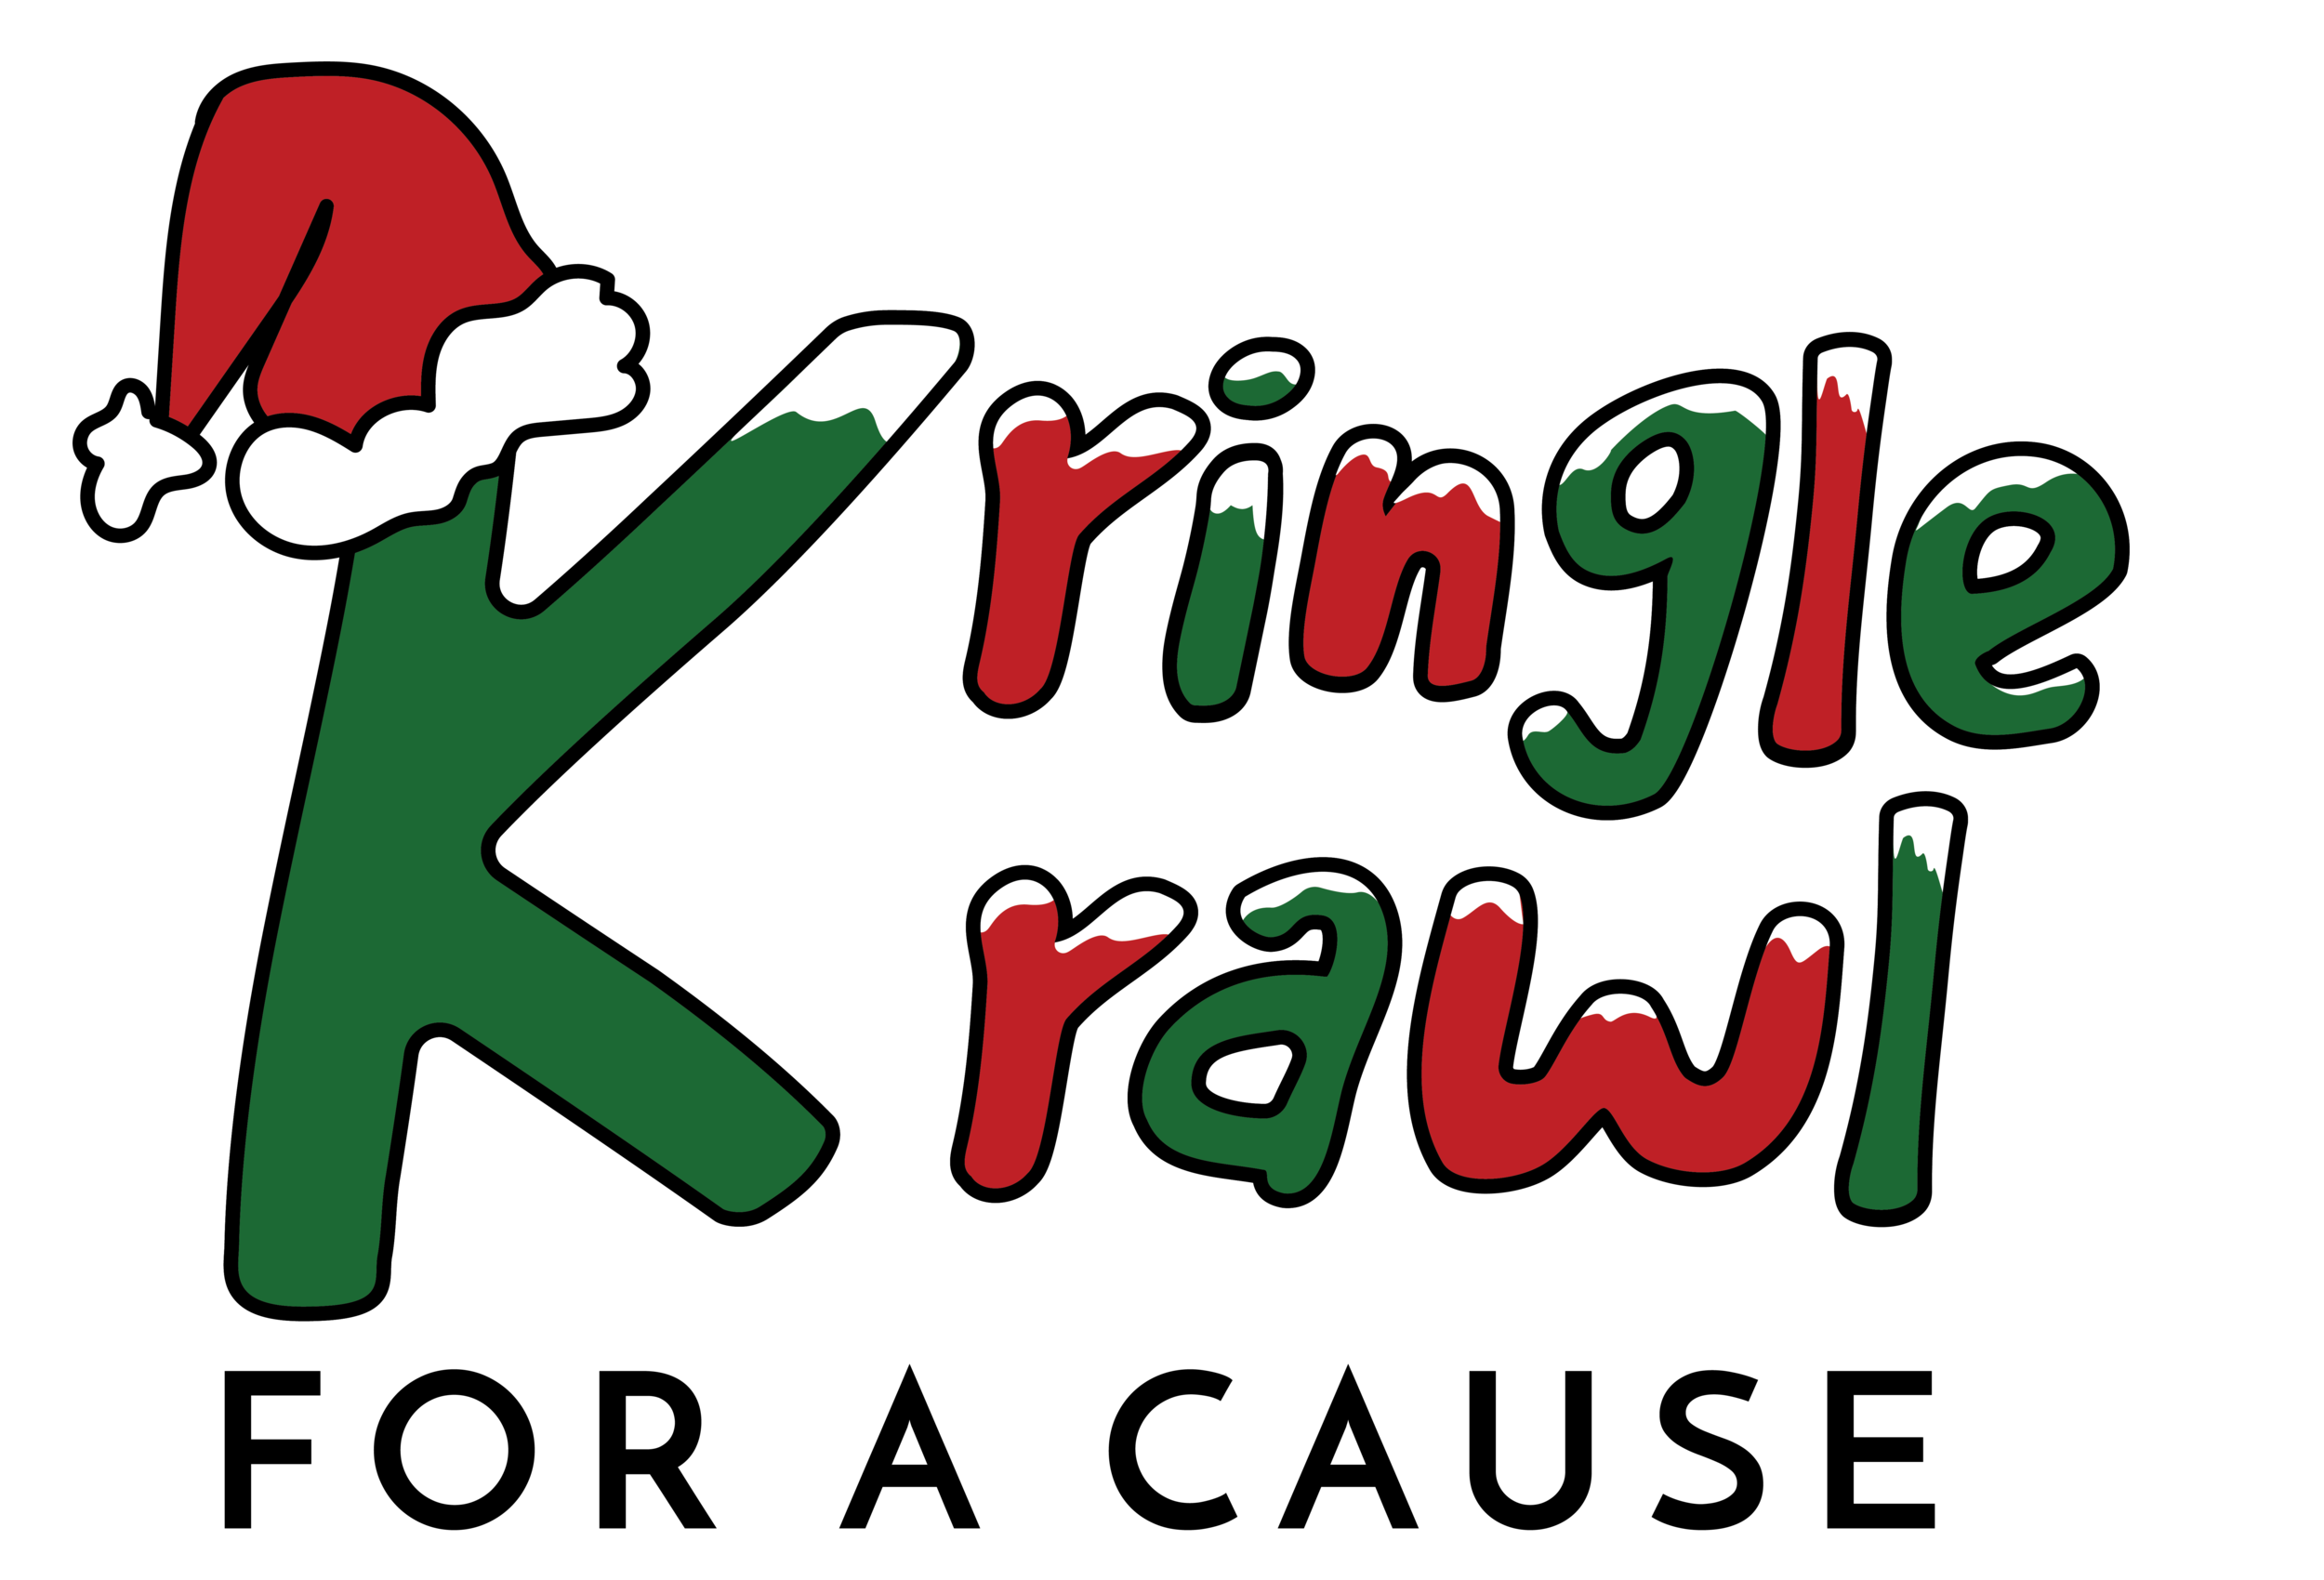 Kringle Krawl for a Cause